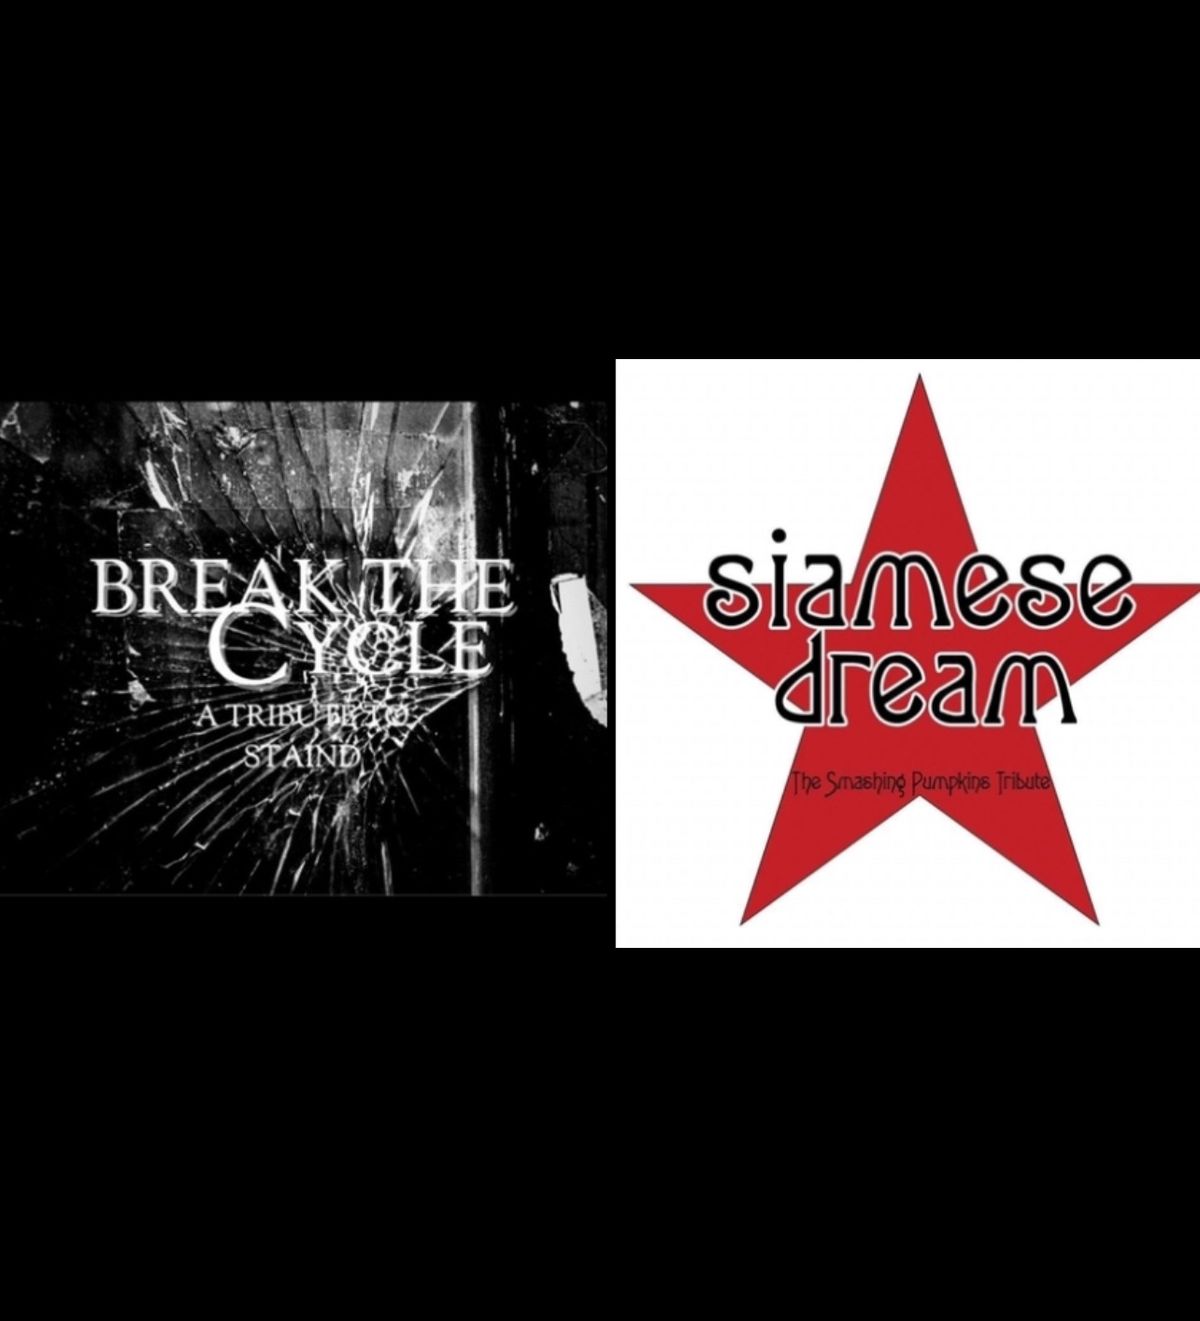 Break the Cycle (Staind Tribute) + Siamese Dream (Smashing Pumpkins Tribute) at Heavy Metal Brewing!